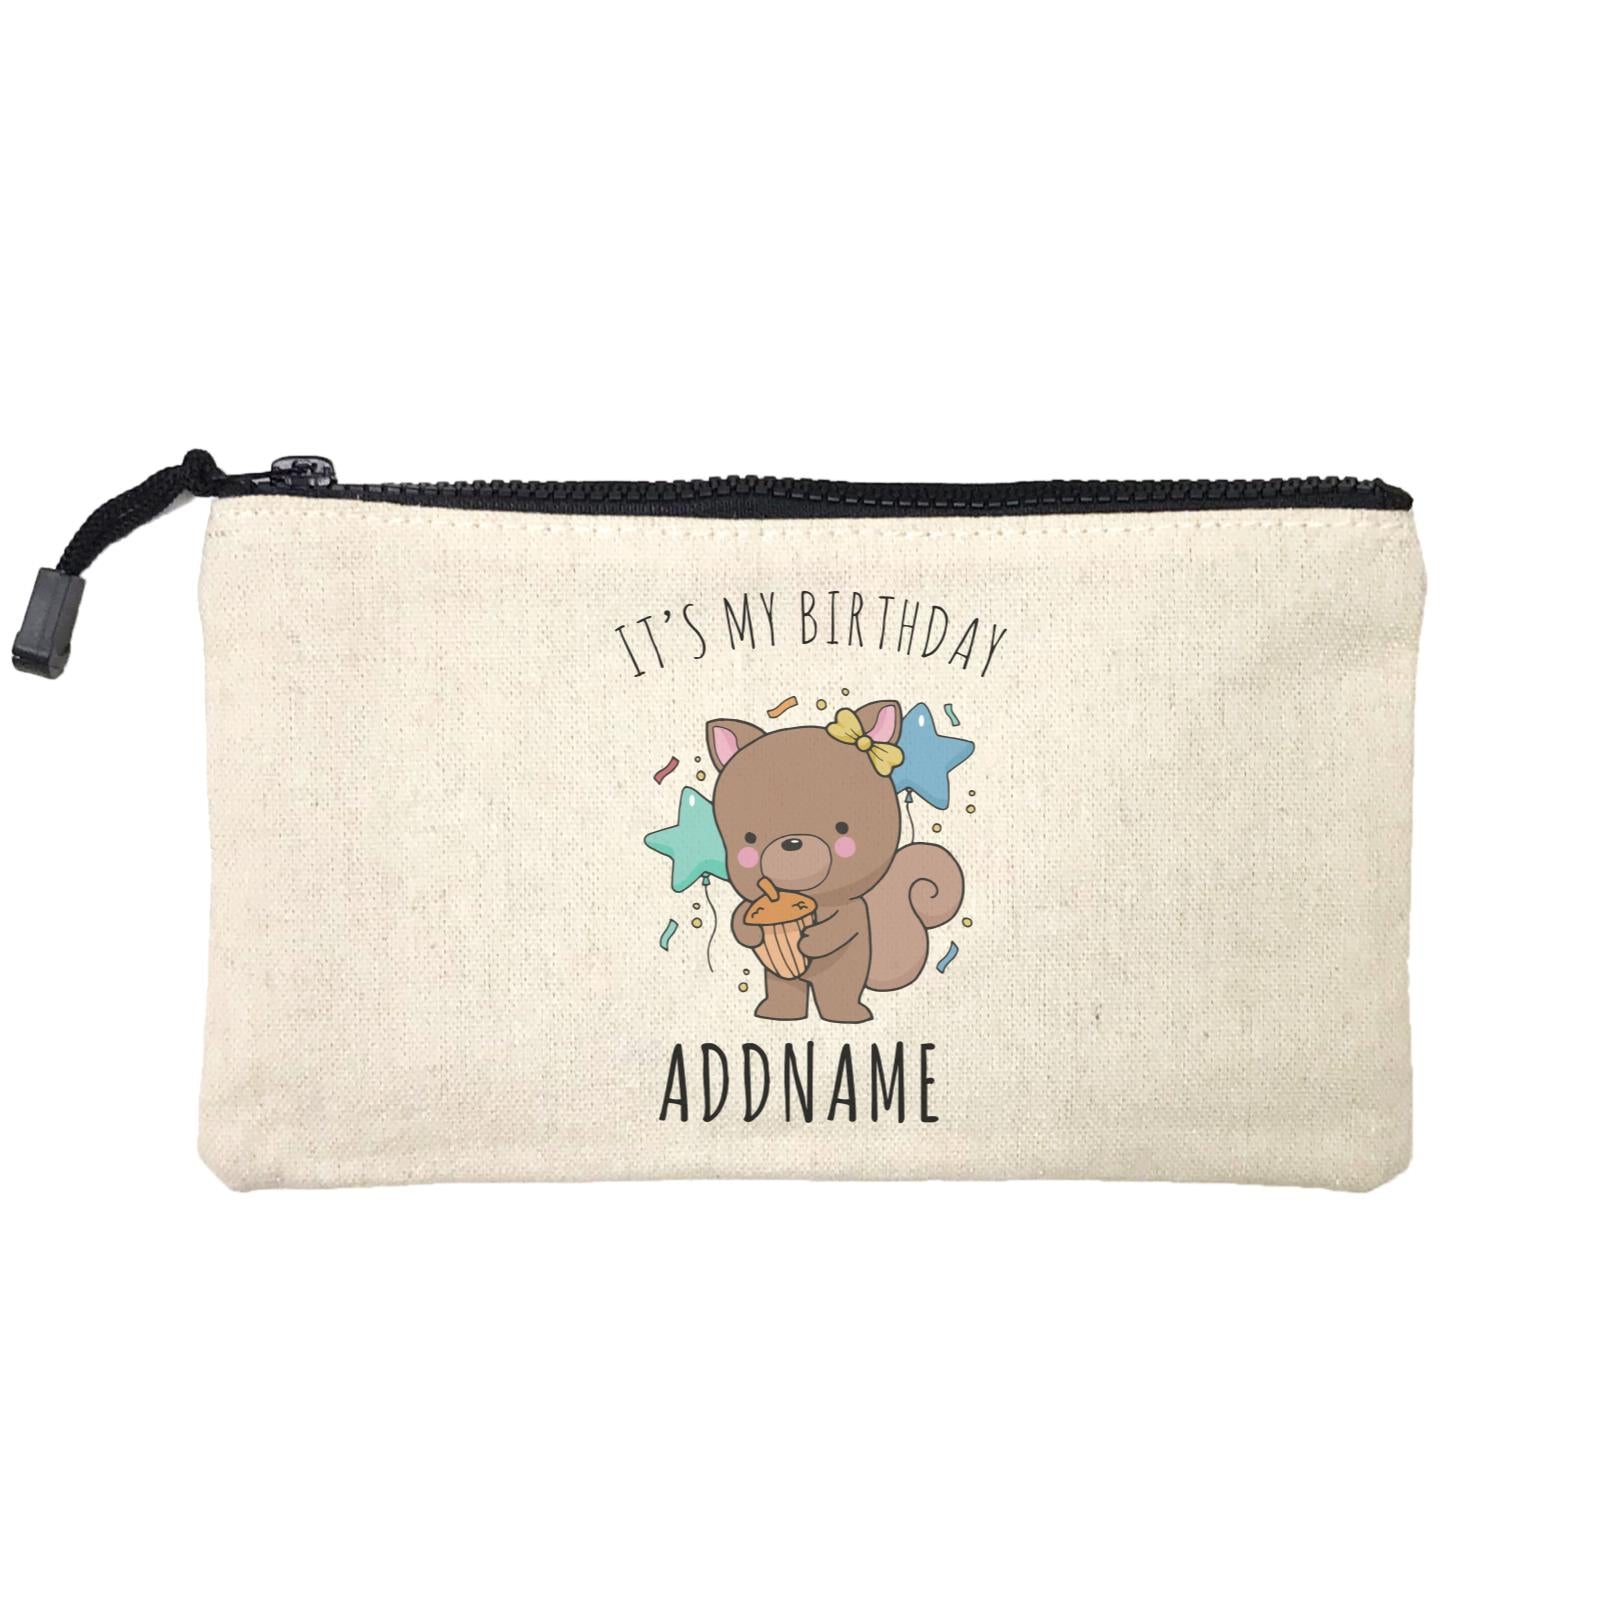 Birthday Sketch Animals Squirrel with Acorn It's My Birthday Addname Mini Accessories Stationery Pouch